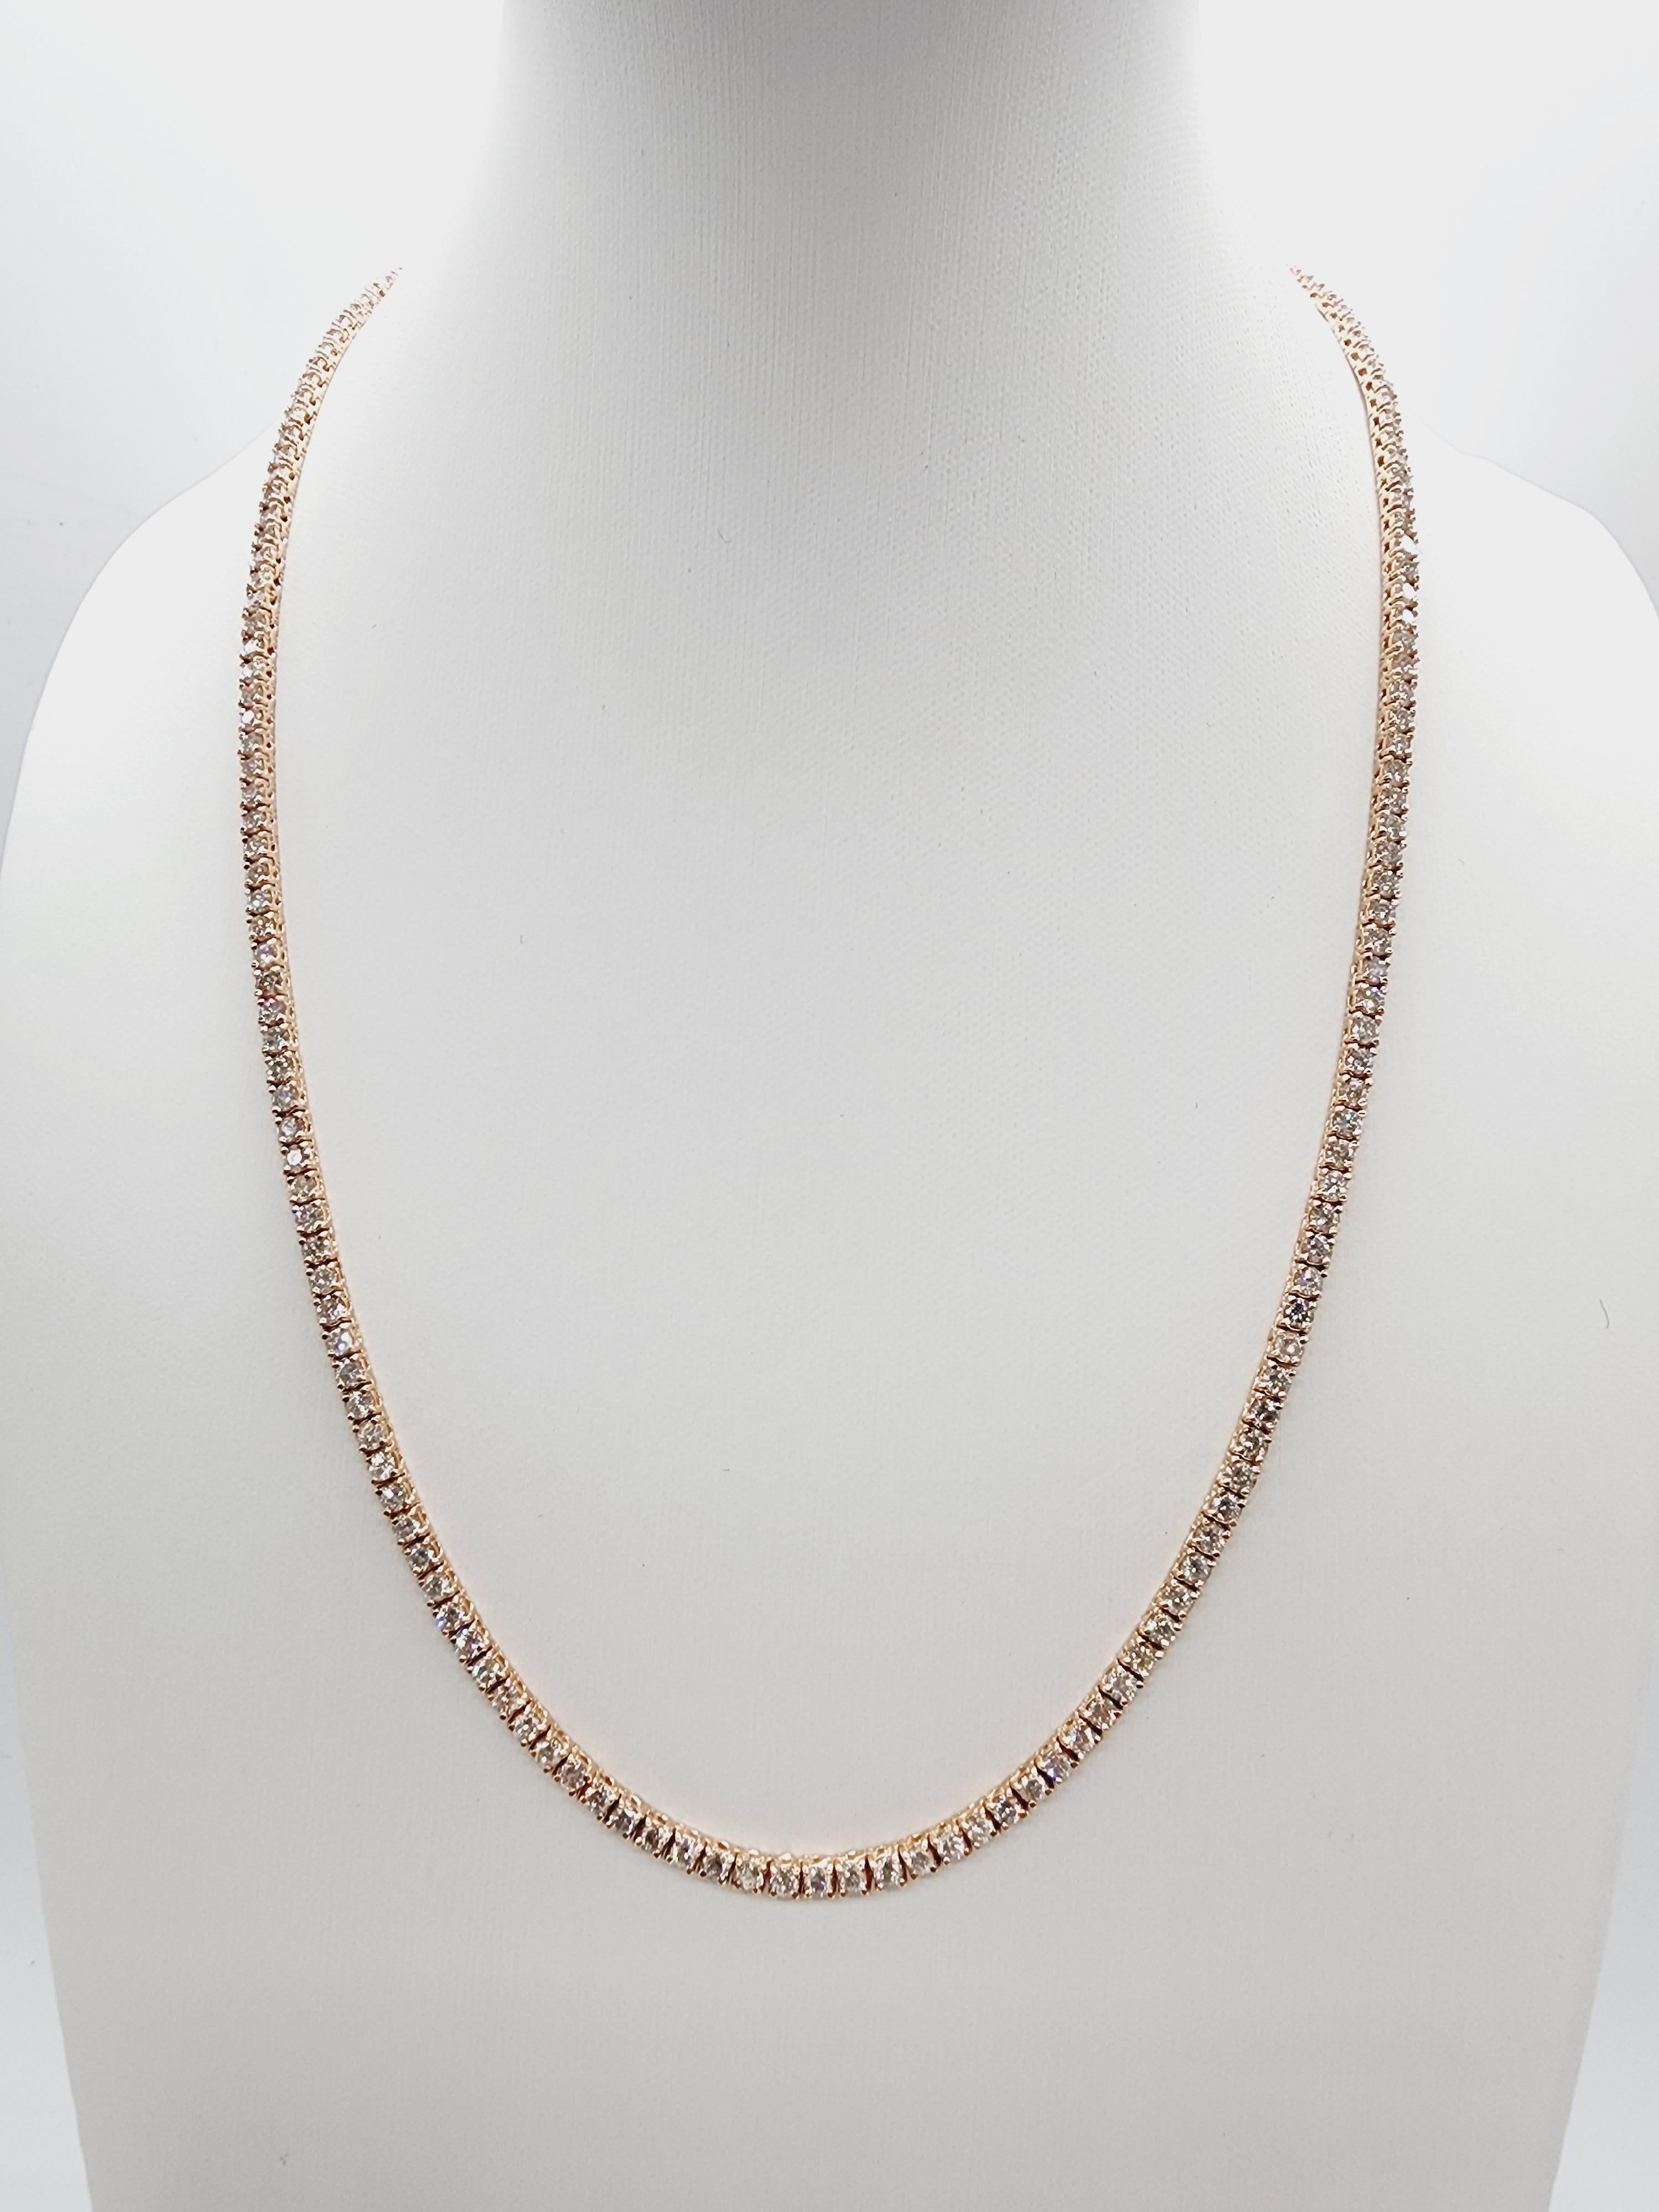 Brilliant and beautiful tennis necklace, natural round-brilliant cut white diamonds clean and Excellent shine. 14k rose gold classic four-prong style for maximum light brilliance. Elegance for every occasion.

18 inch length. 
Average I Color, SI